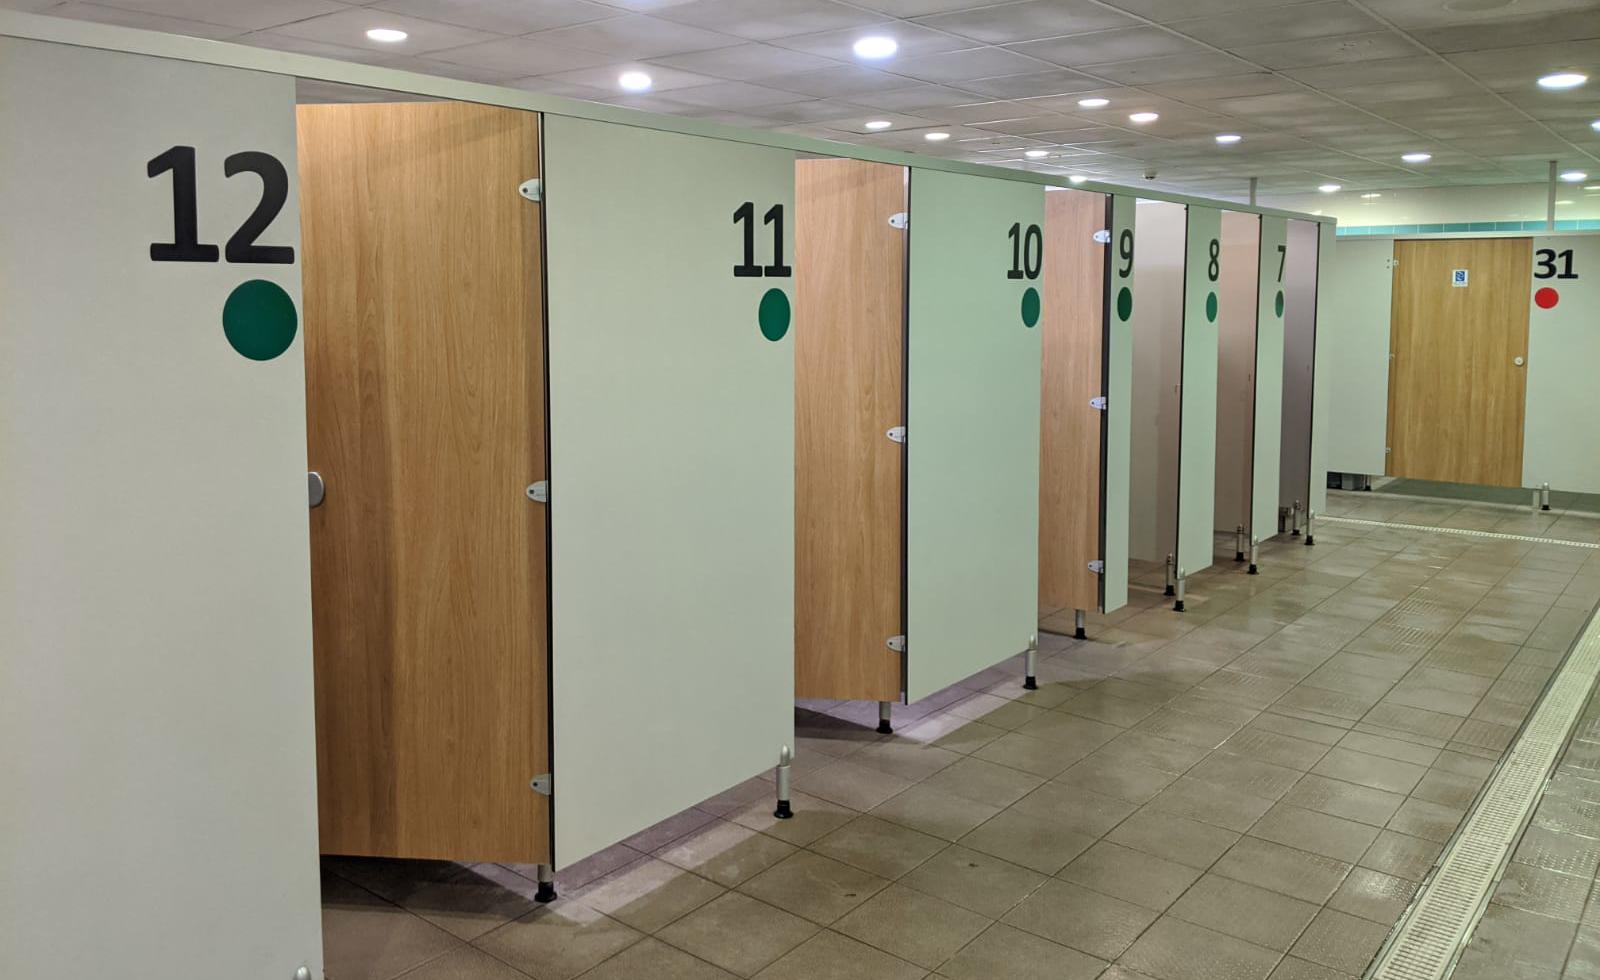 Green cubicles for Stage 4 swimmers